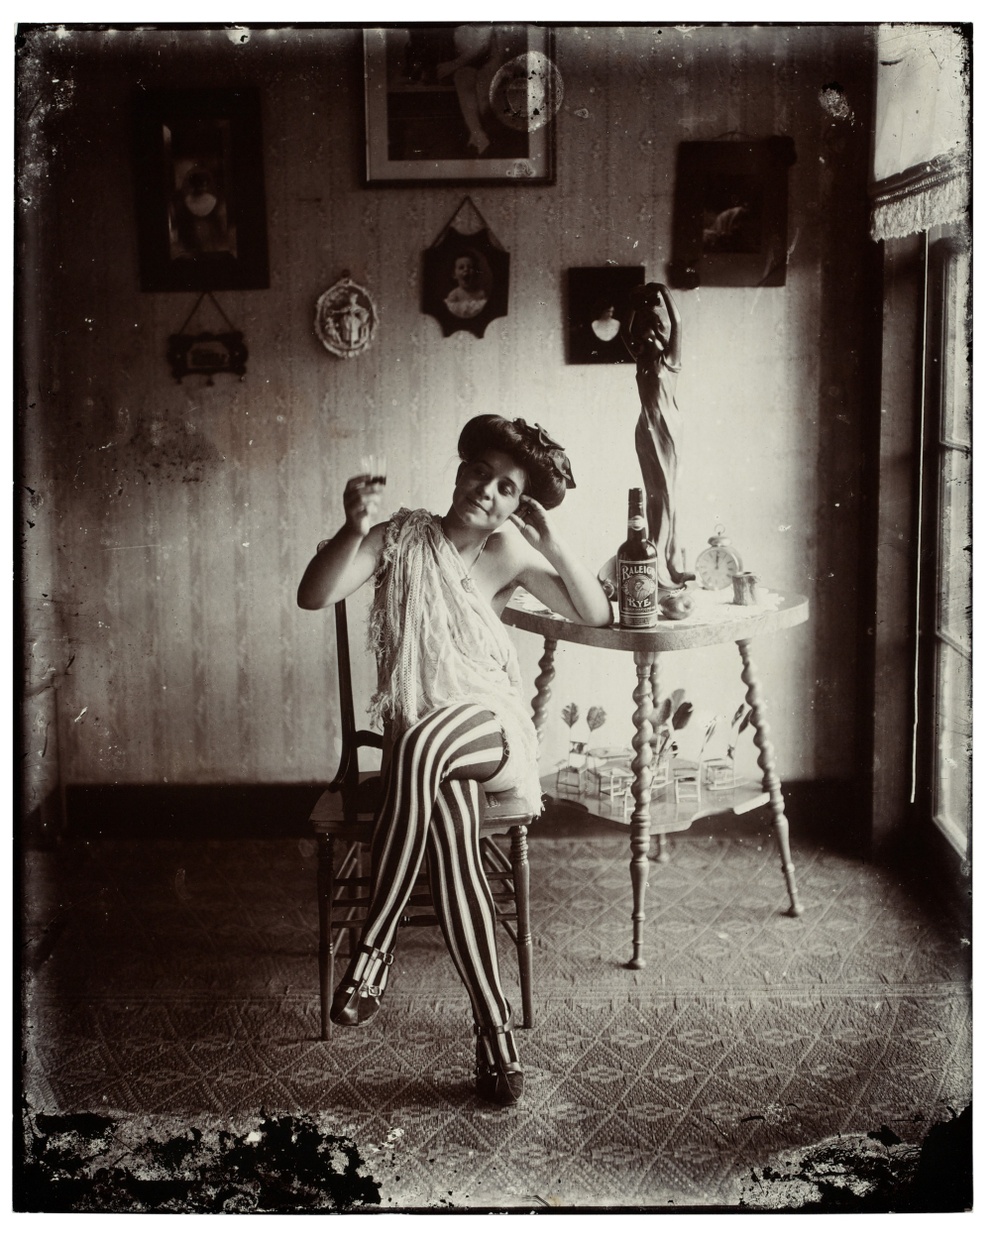 black and white photo of a figure sitting on a chair in the middle of a room